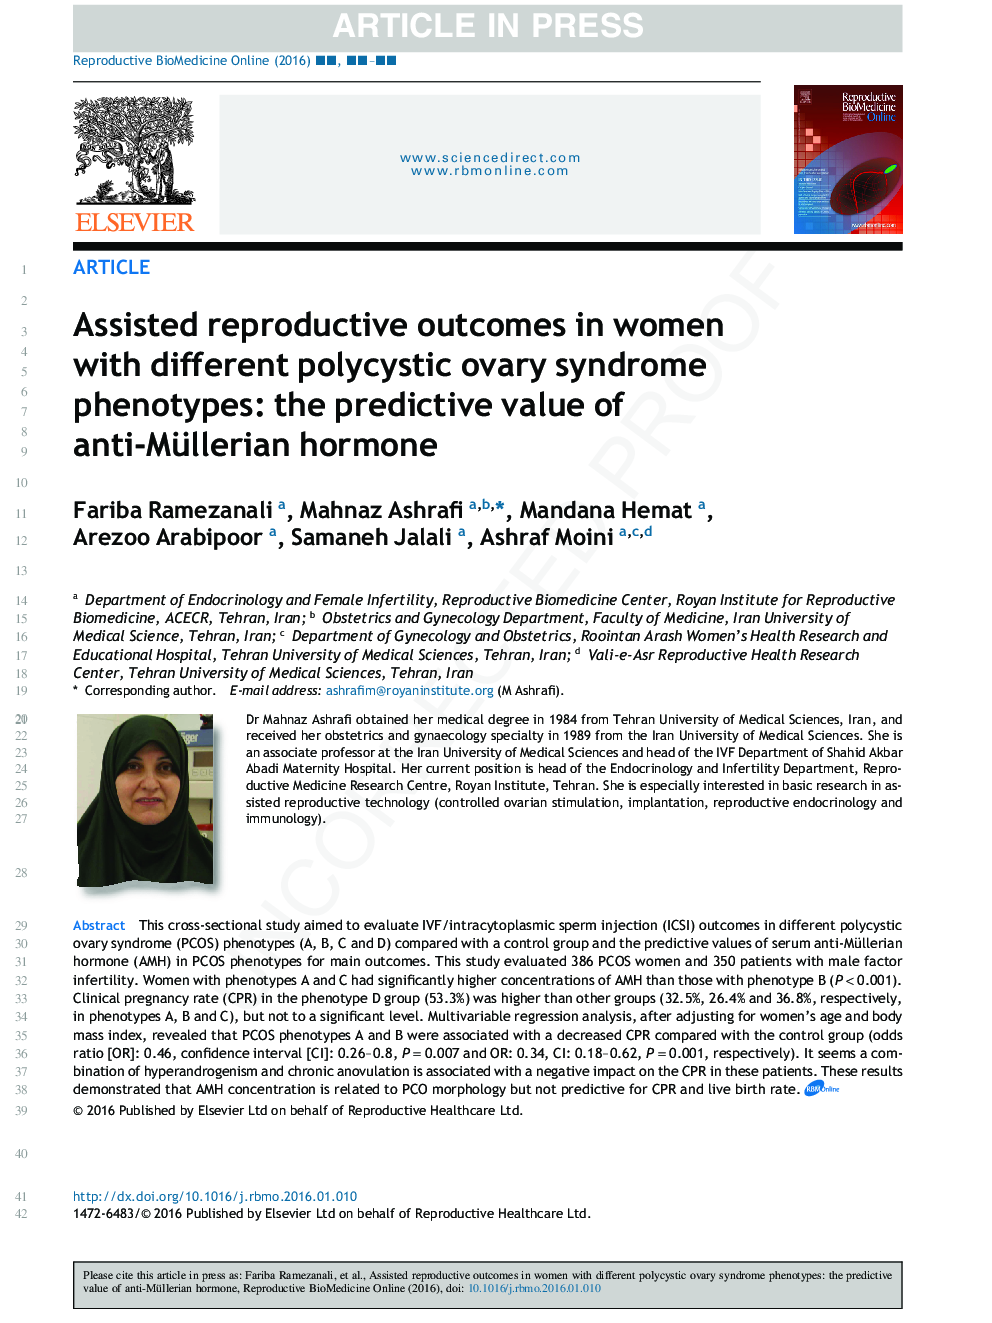 Assisted reproductive outcomes in women with different polycystic ovary syndrome phenotypes: the predictive value of anti-Müllerian hormone